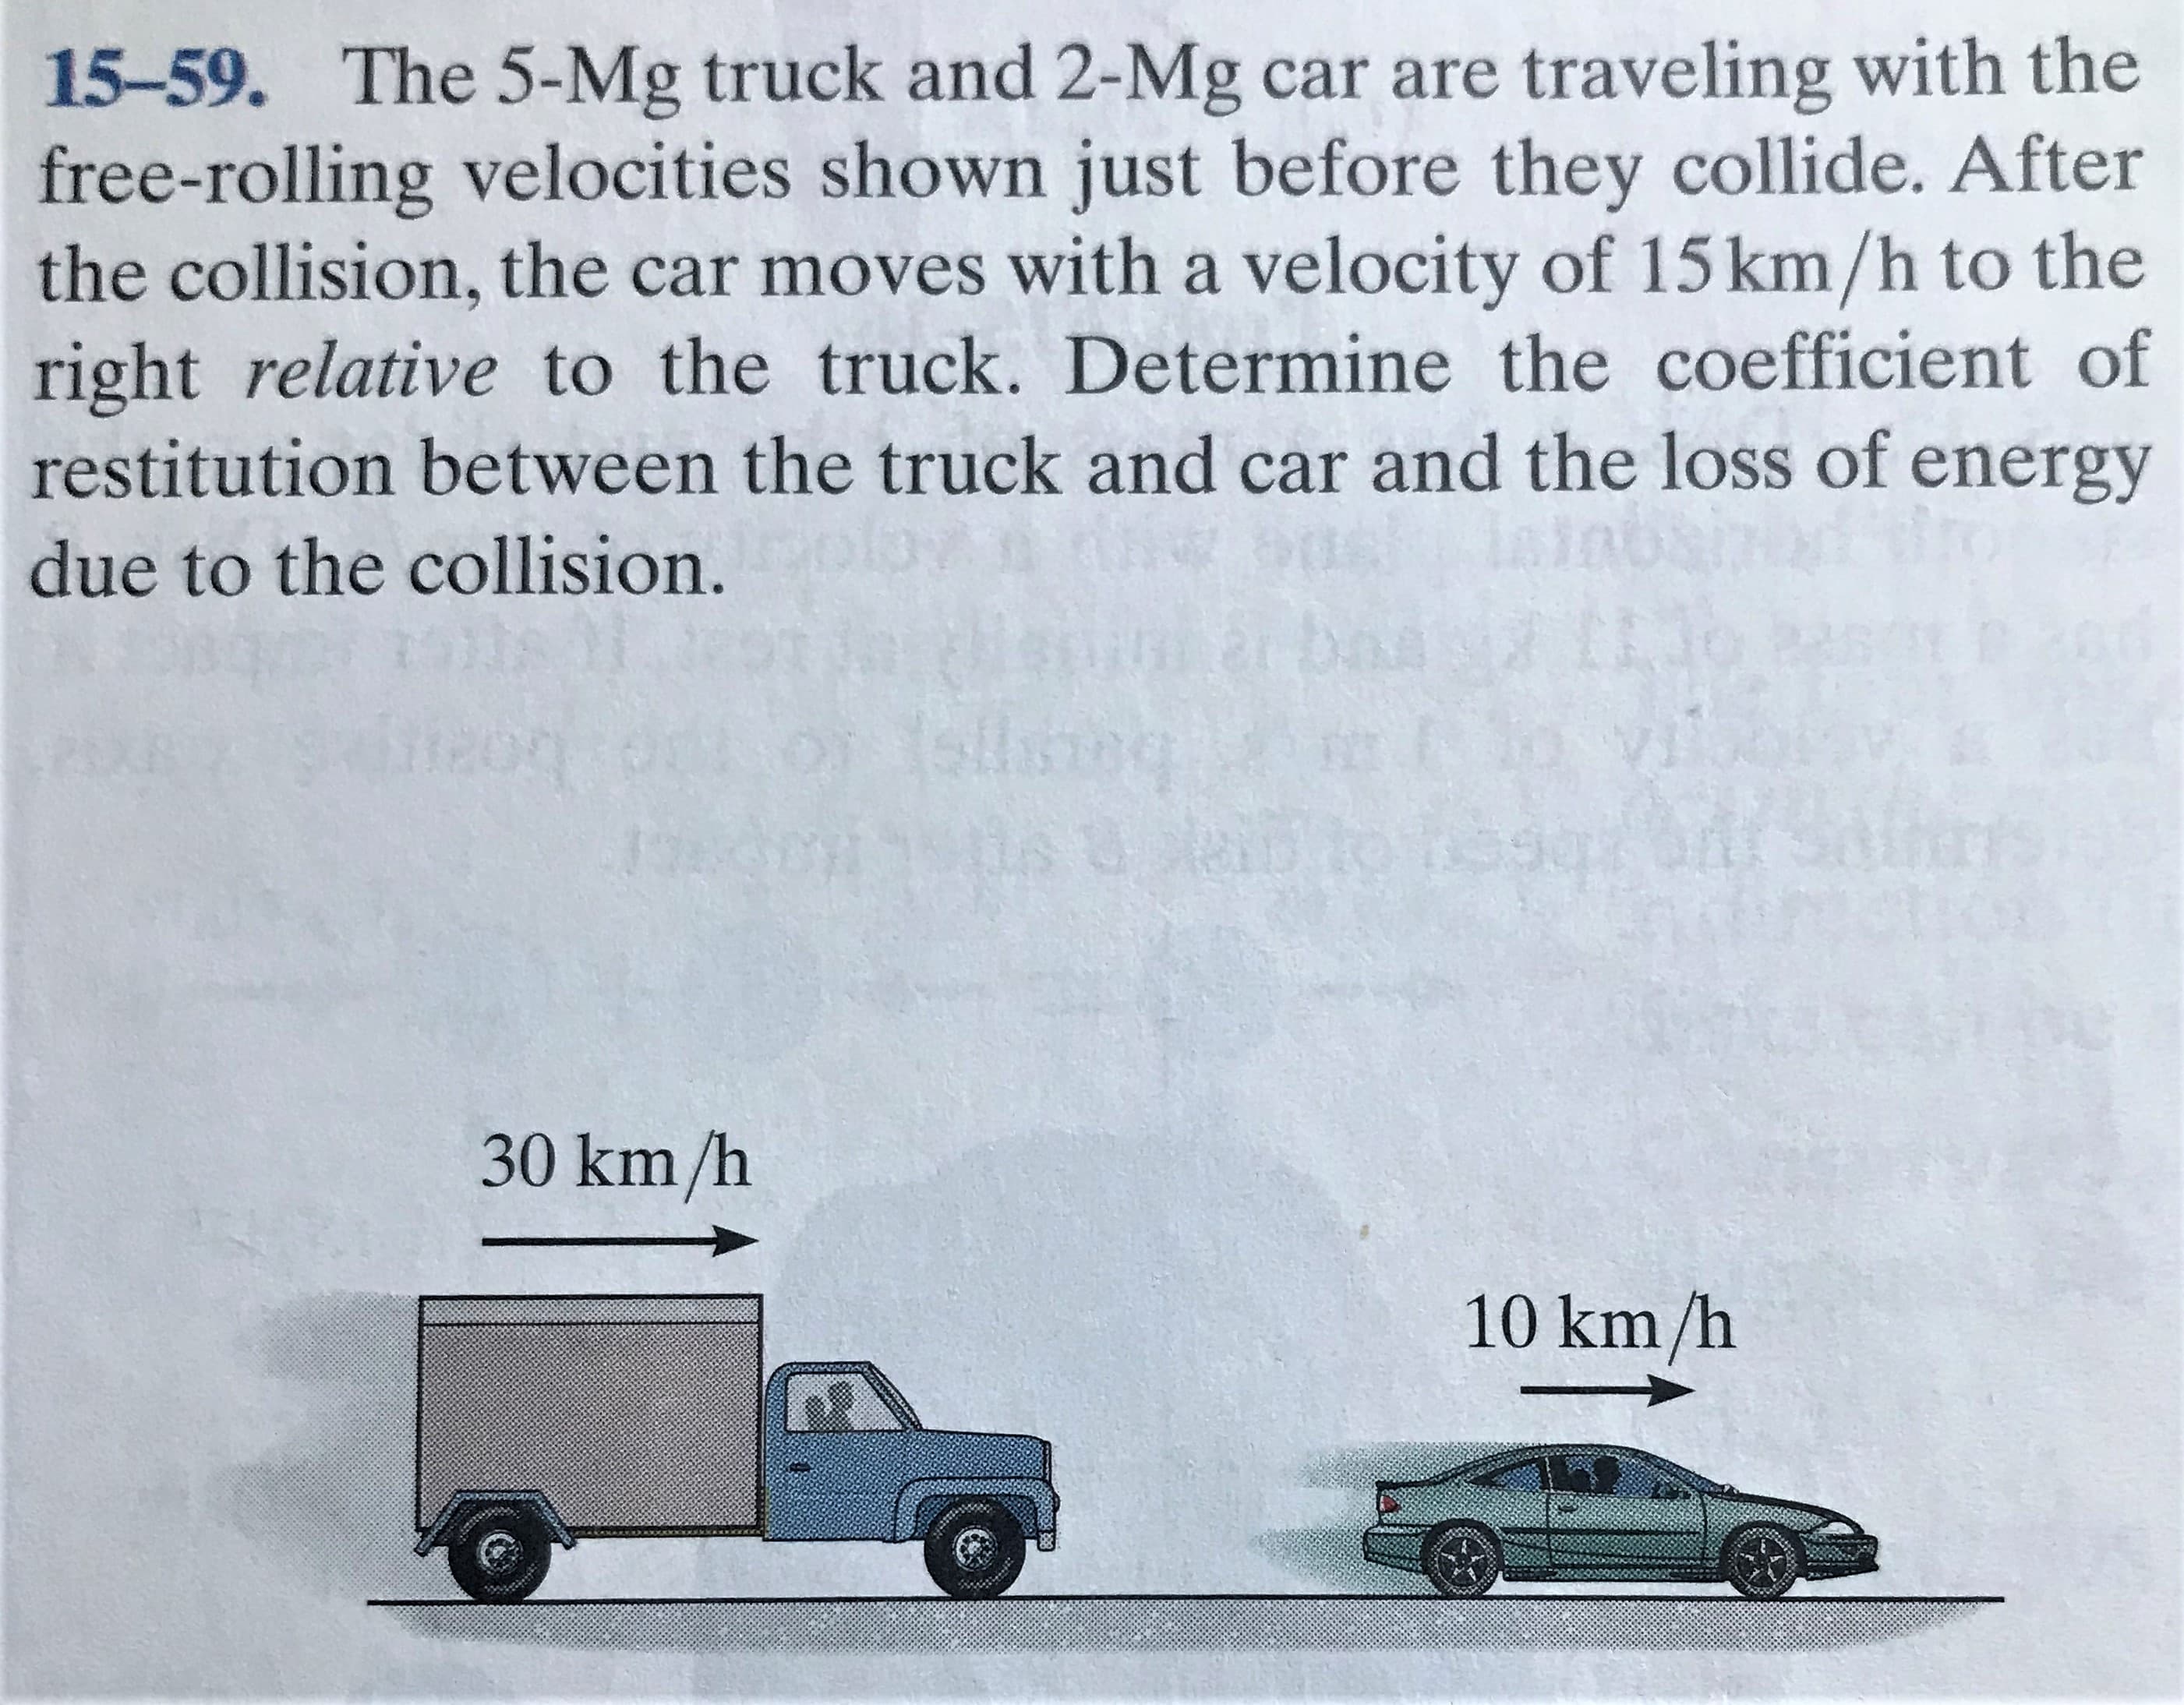 15-59. The 5-Mg truck and 2-Mg car are traveling with the
free-rolling velocities shown just before they collide. After
the collision, the car moves with a velocity of 15 km/h to the
right relative to the truck. Determine the coefficient of
restitution between the truck and car and the loss of energy
due to the collision.
bas
basps
30 km/h
10 km/h
